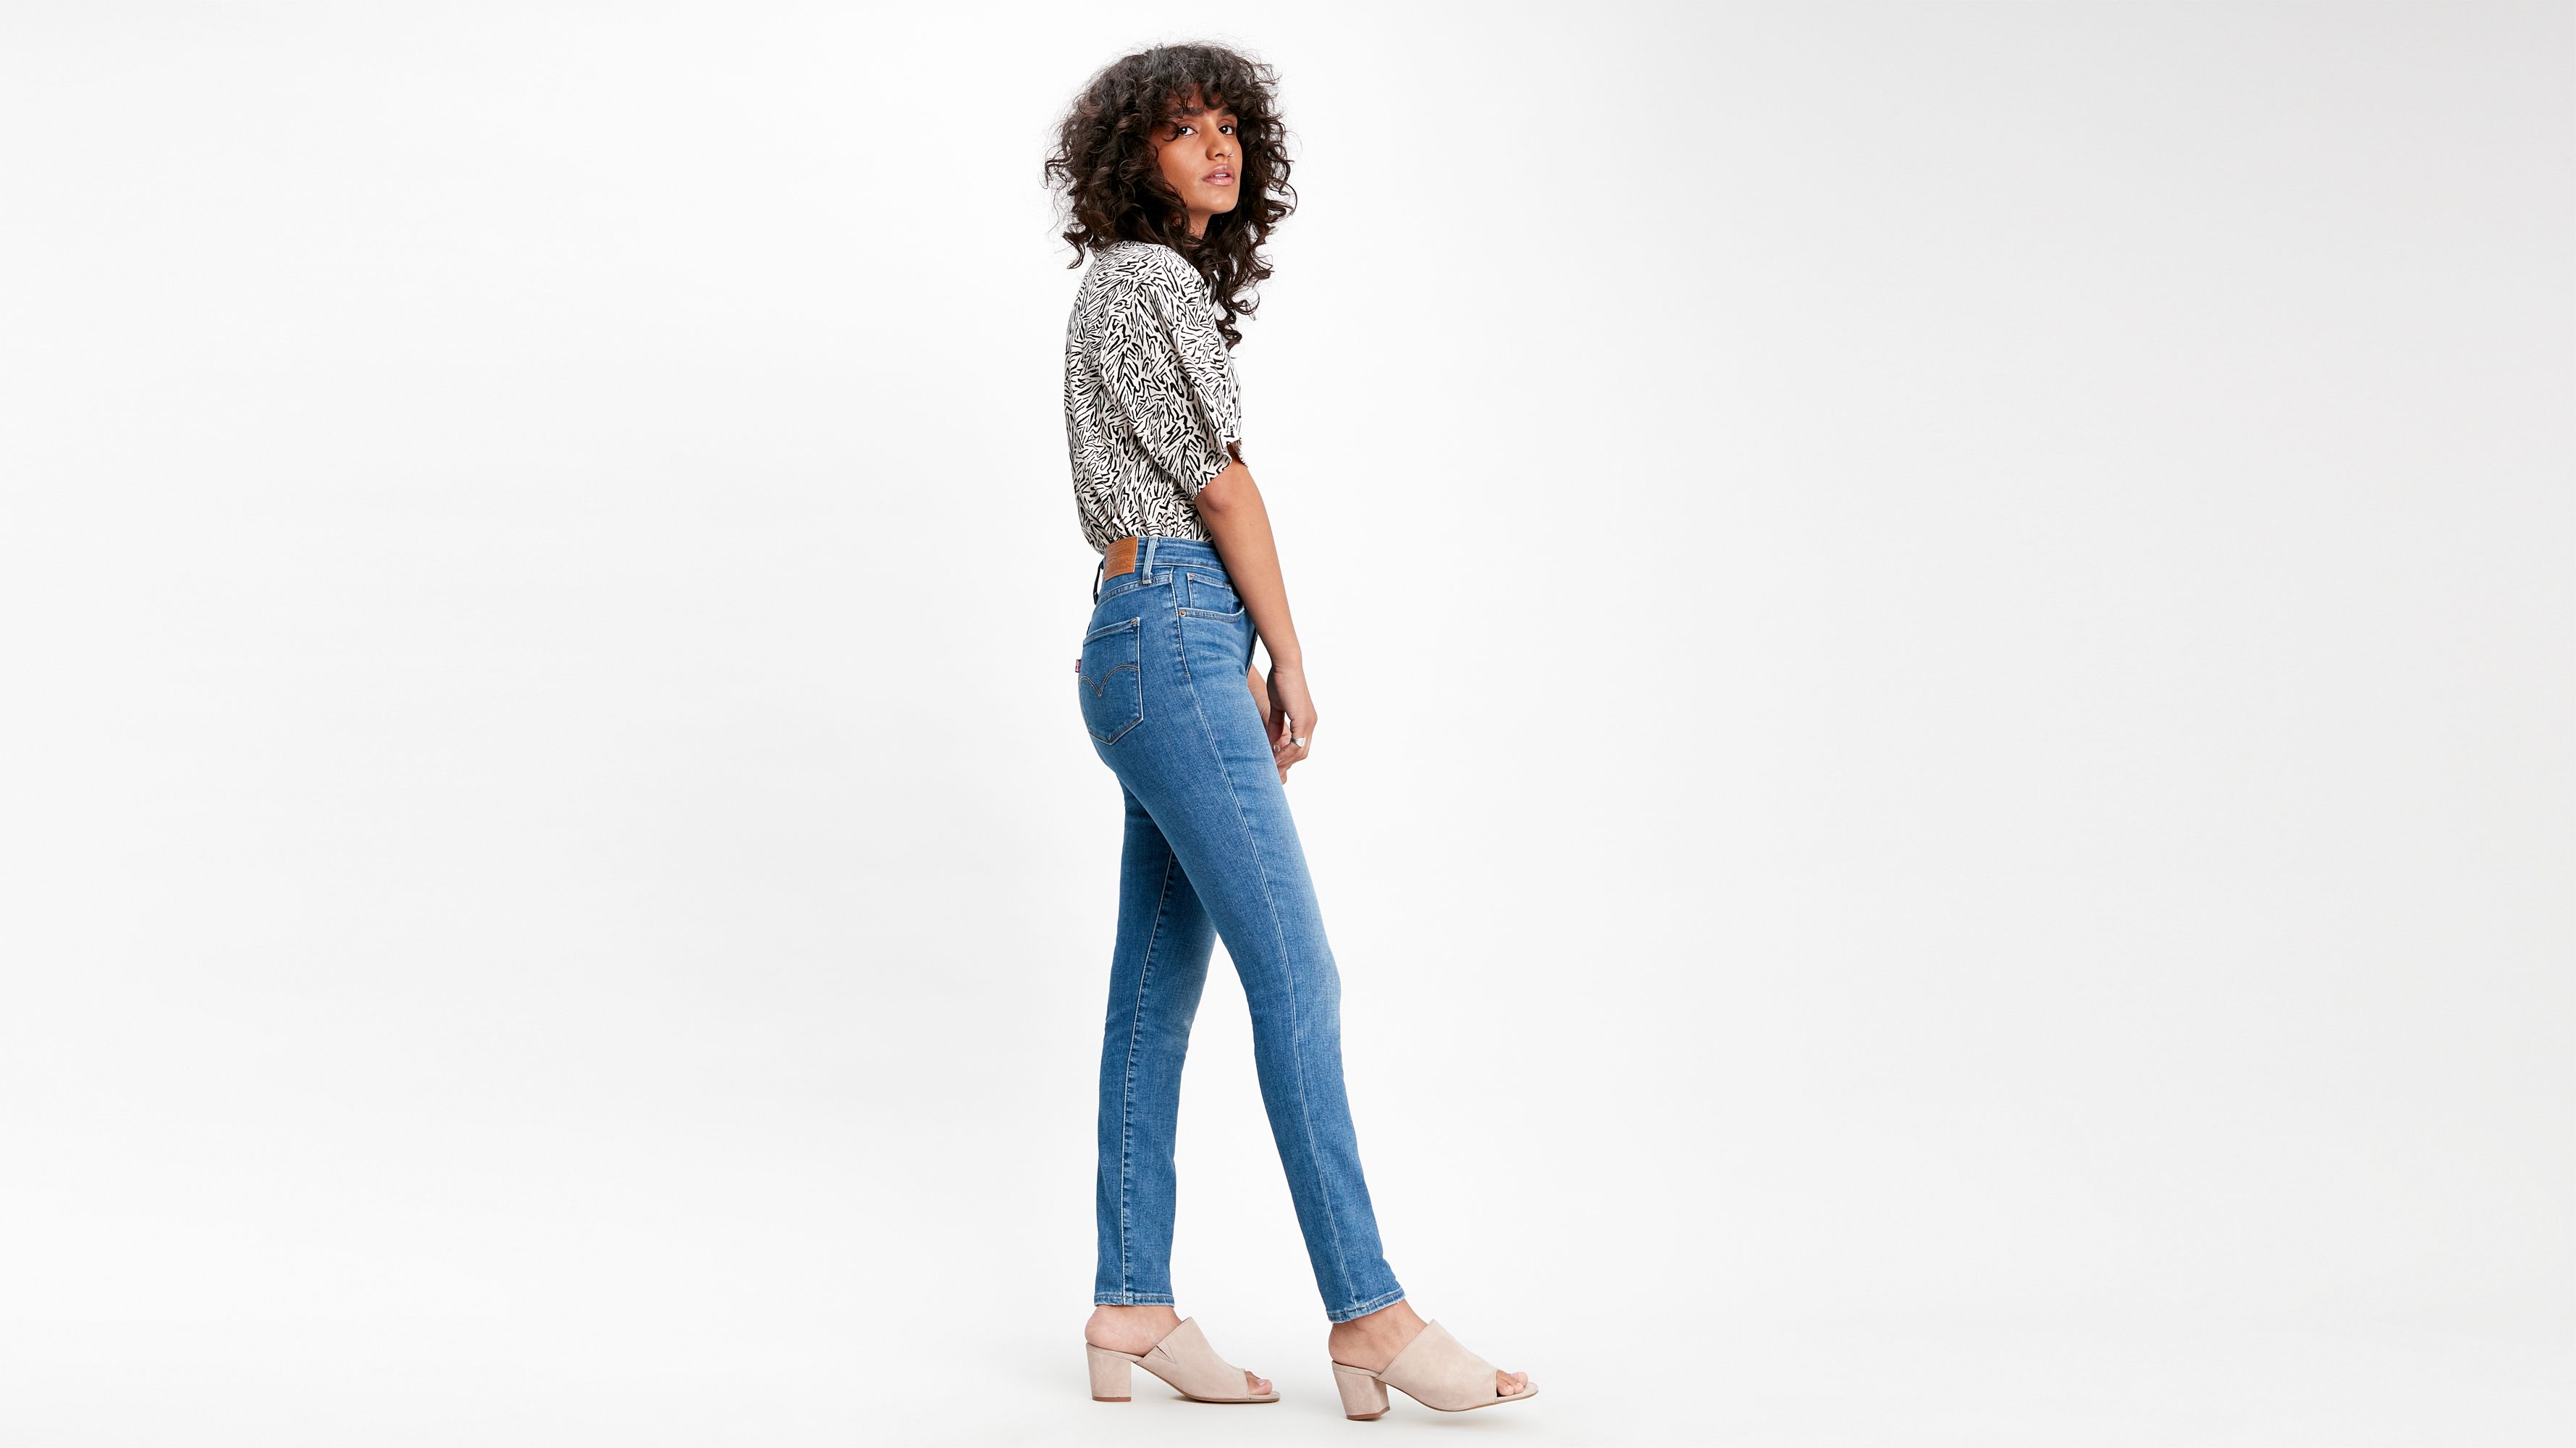 high rise skinny 721 levis